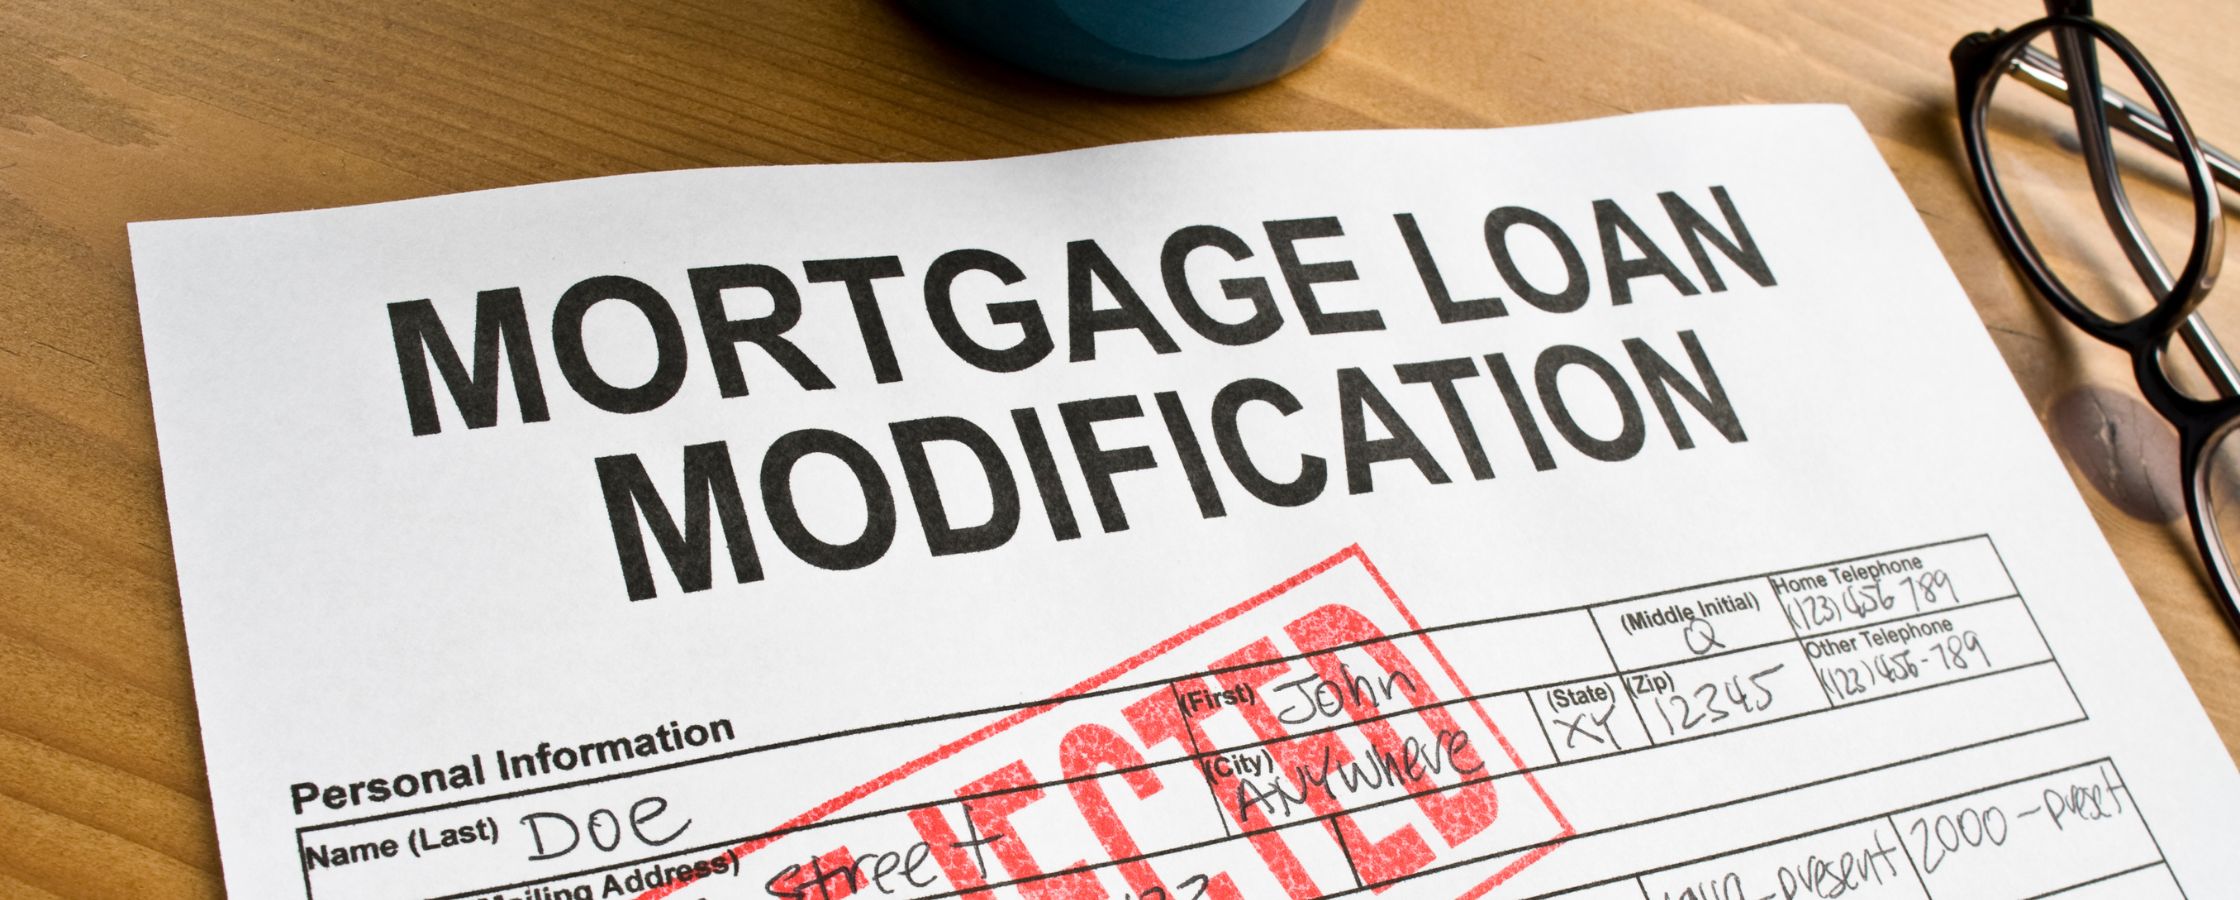 Capital Homes And Land - Struggling with a mortgages